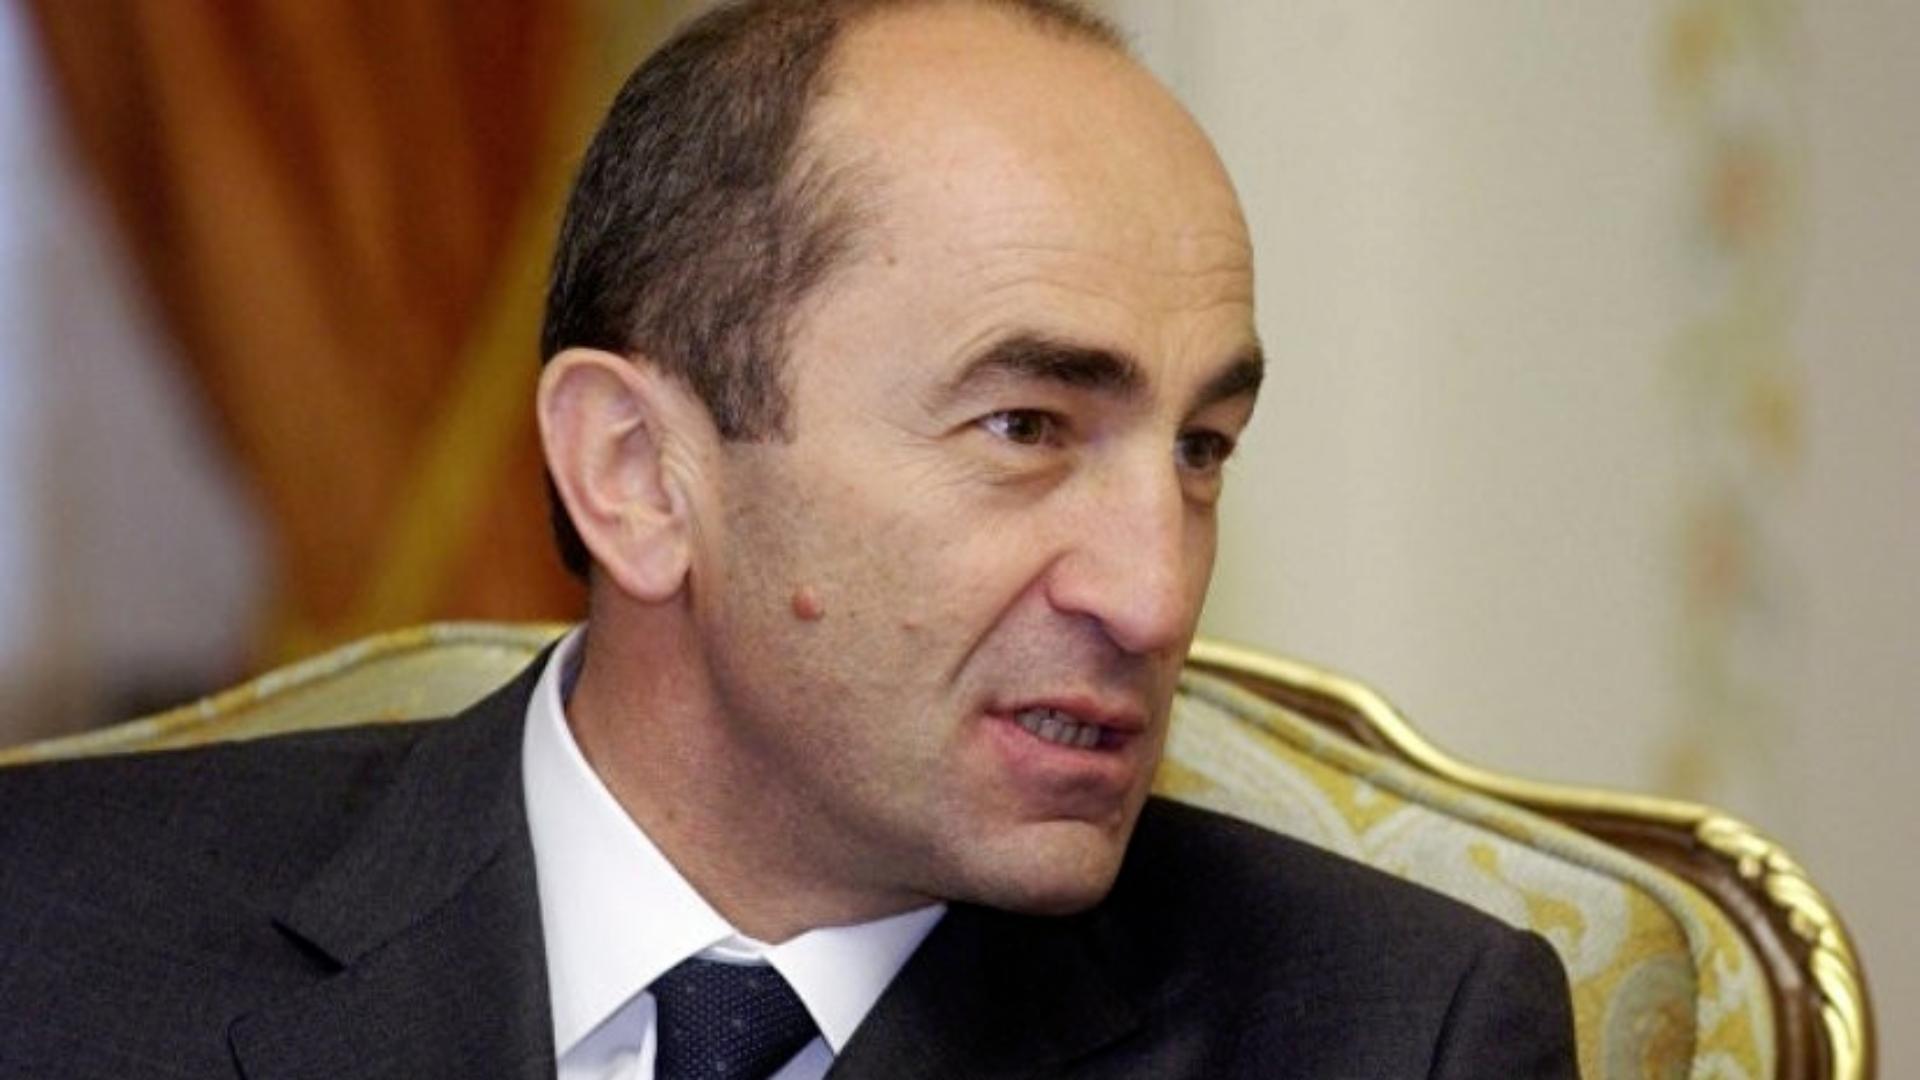 Kocharyan Faces the Possibility of Another Arrest